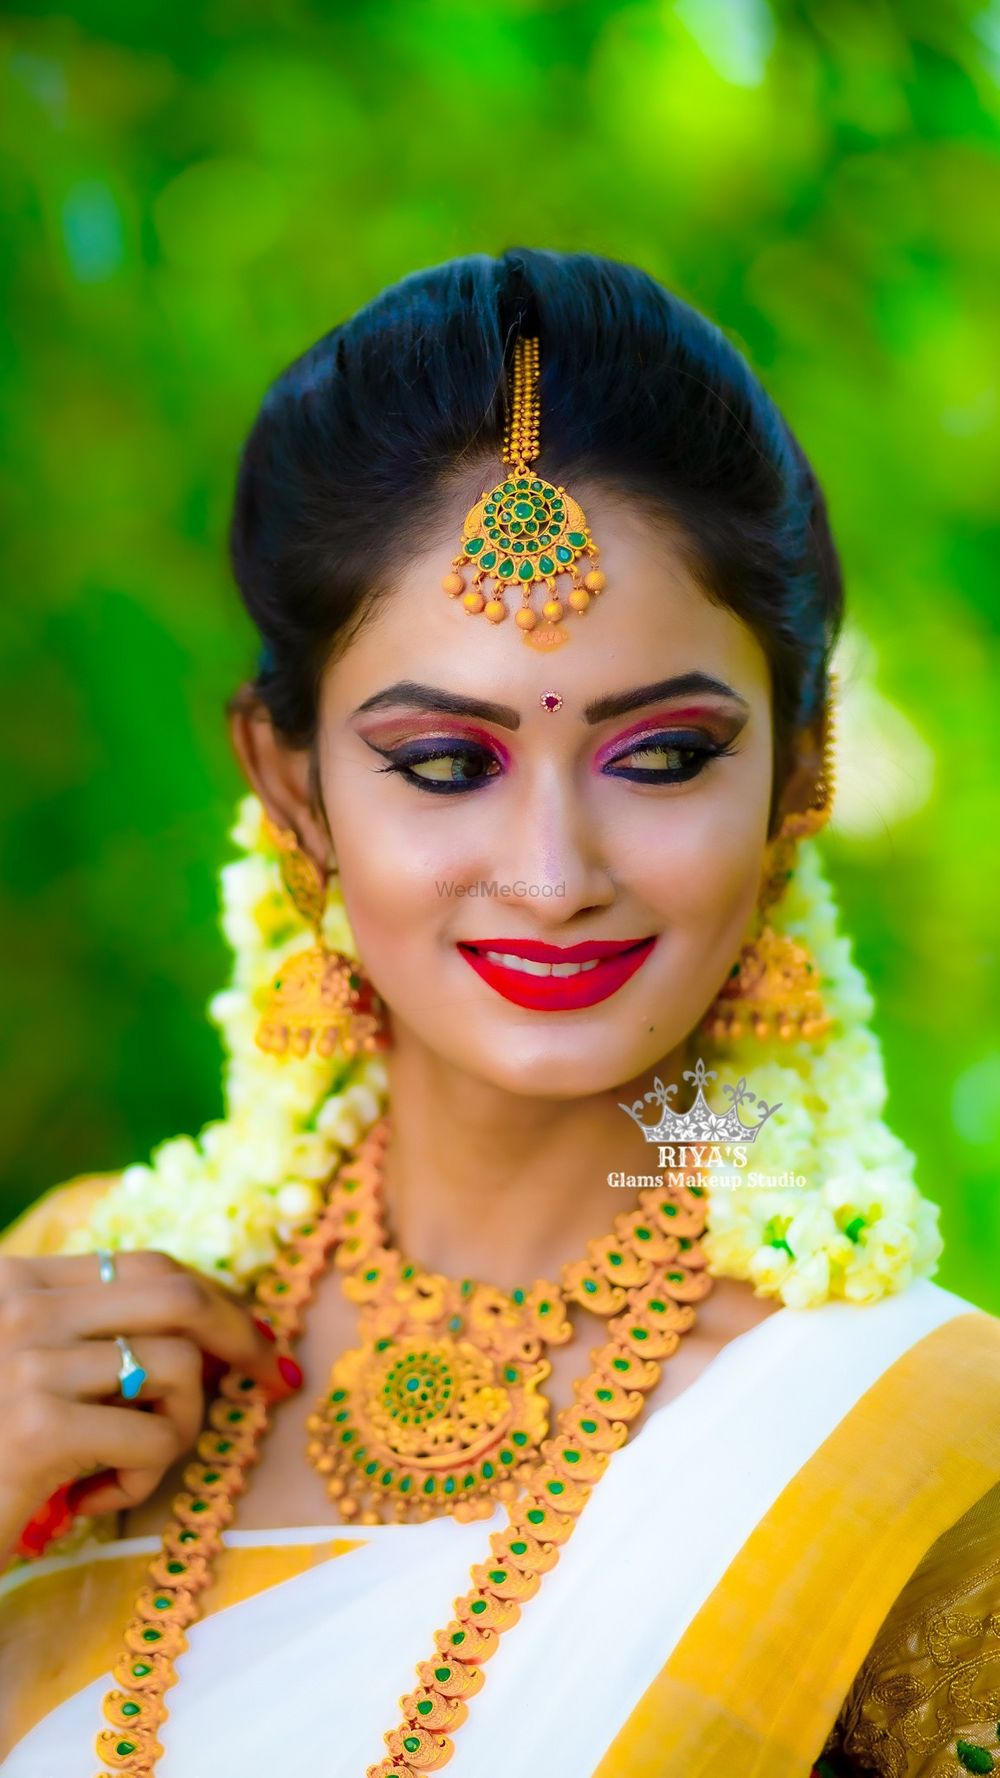 Photo From Onam Special - By Glams Makeup Studio